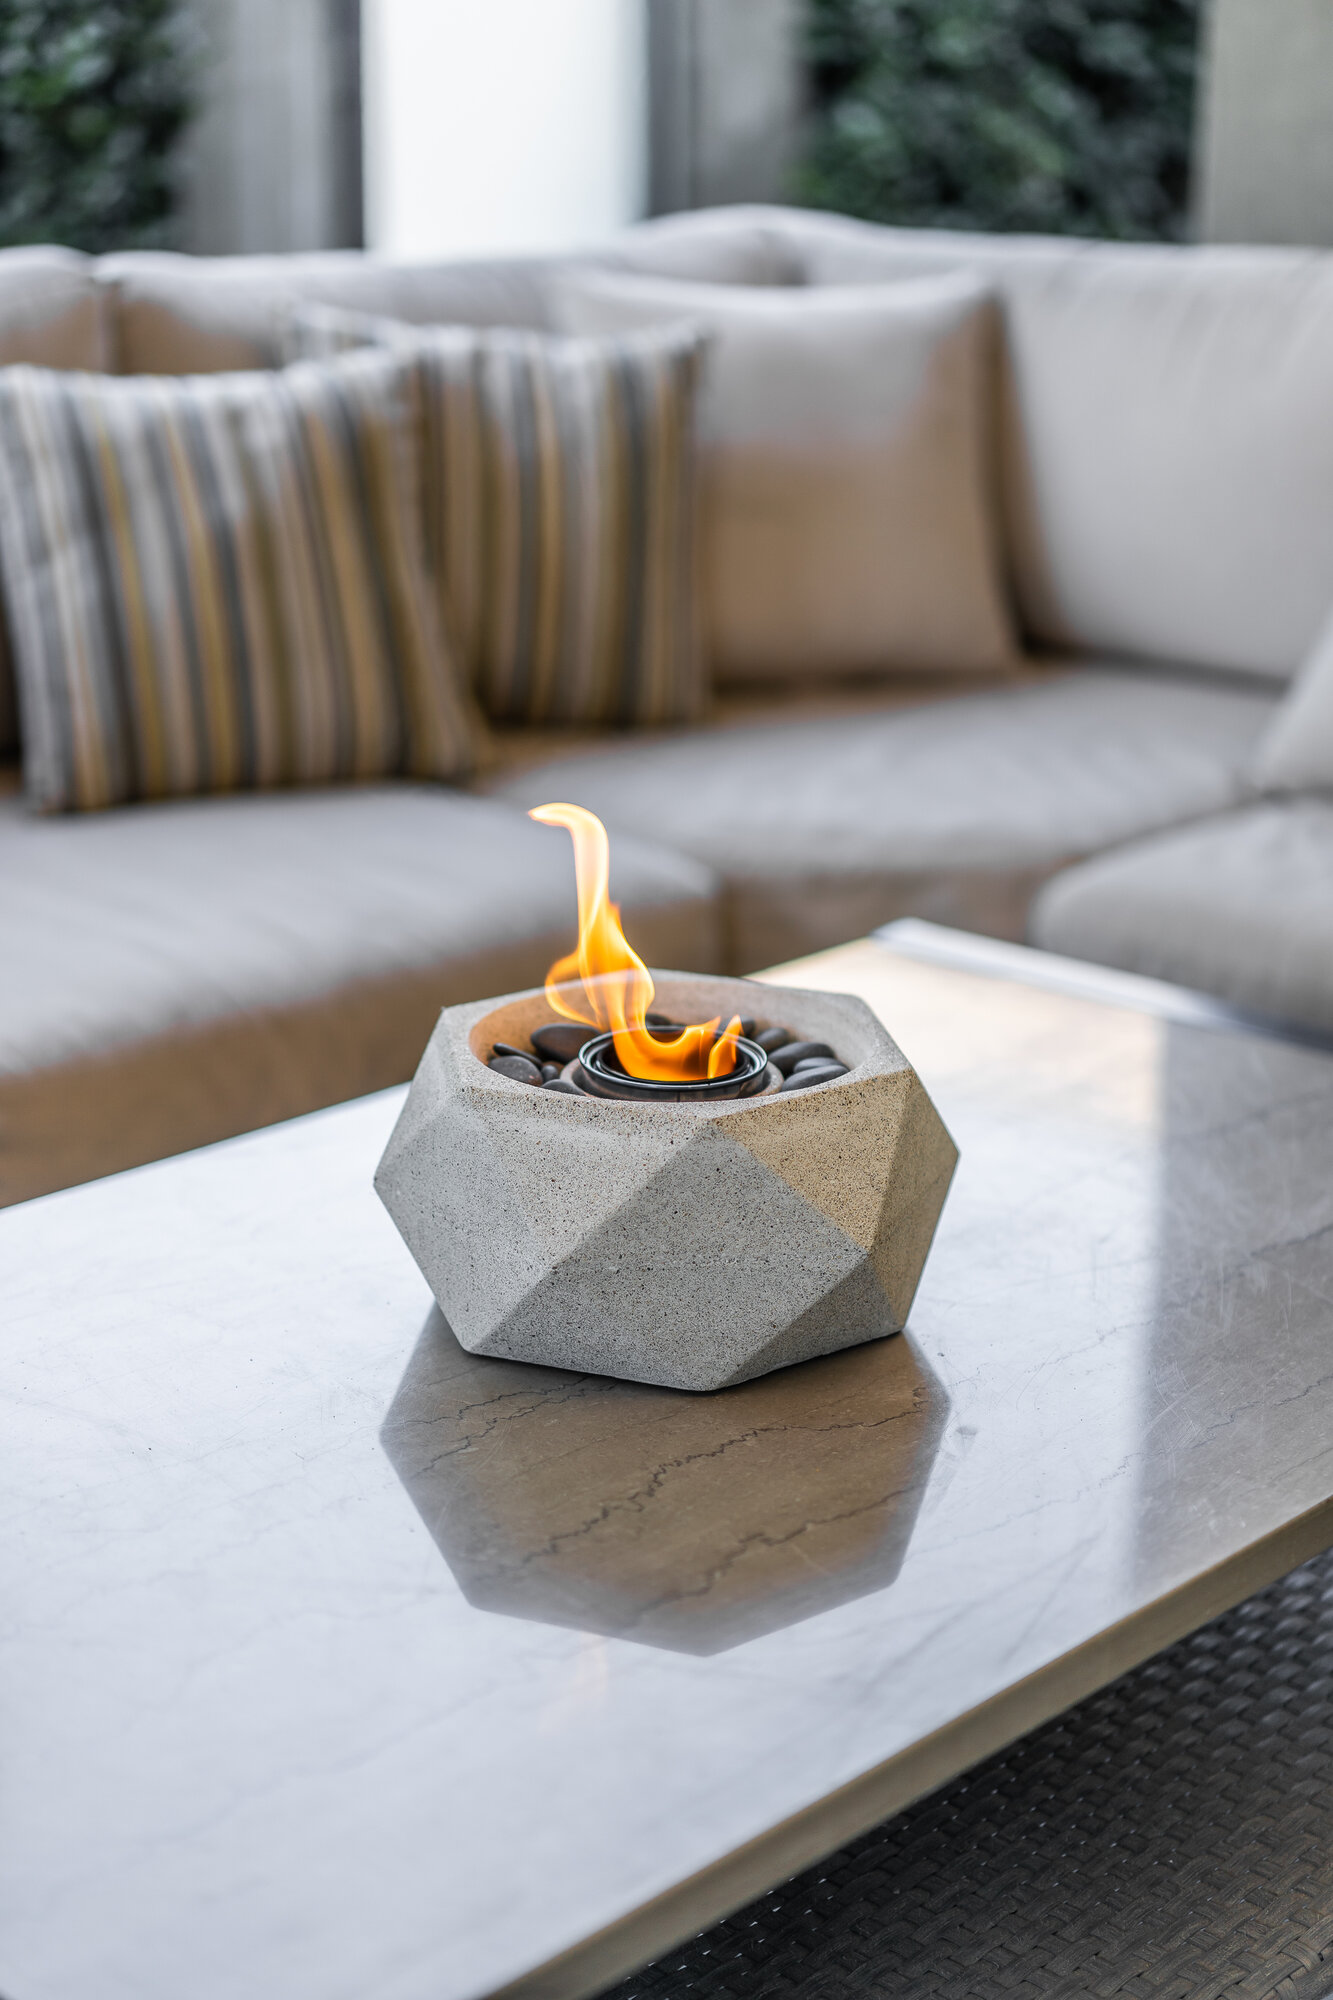 Fireplace Gel Fuel Cans Lovely Details About Terra Flame Geo Gel Fuel Tabletop Fireplace